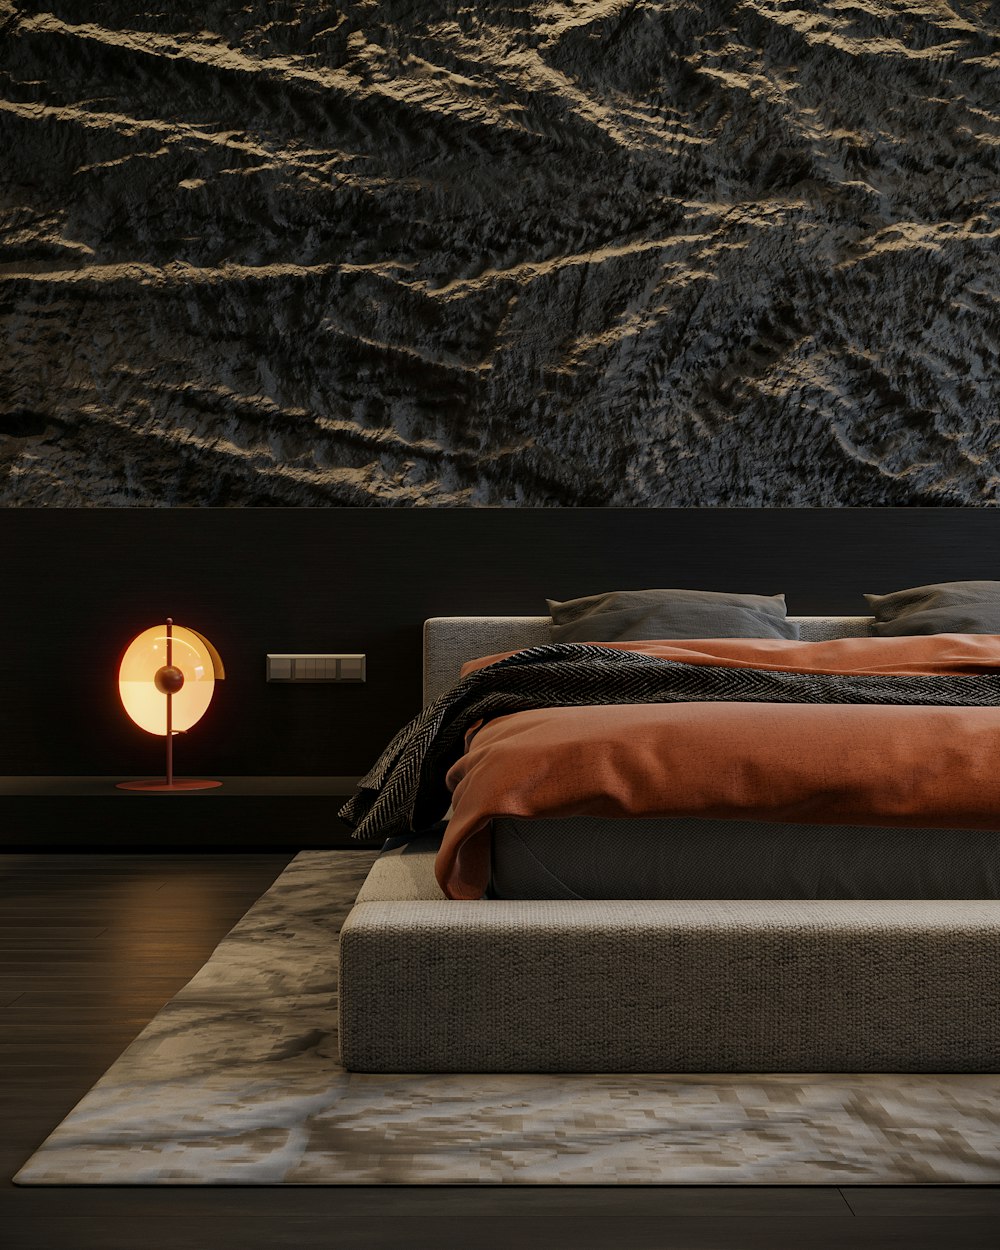 a bed and a lamp in a dark room with a mountain in the background